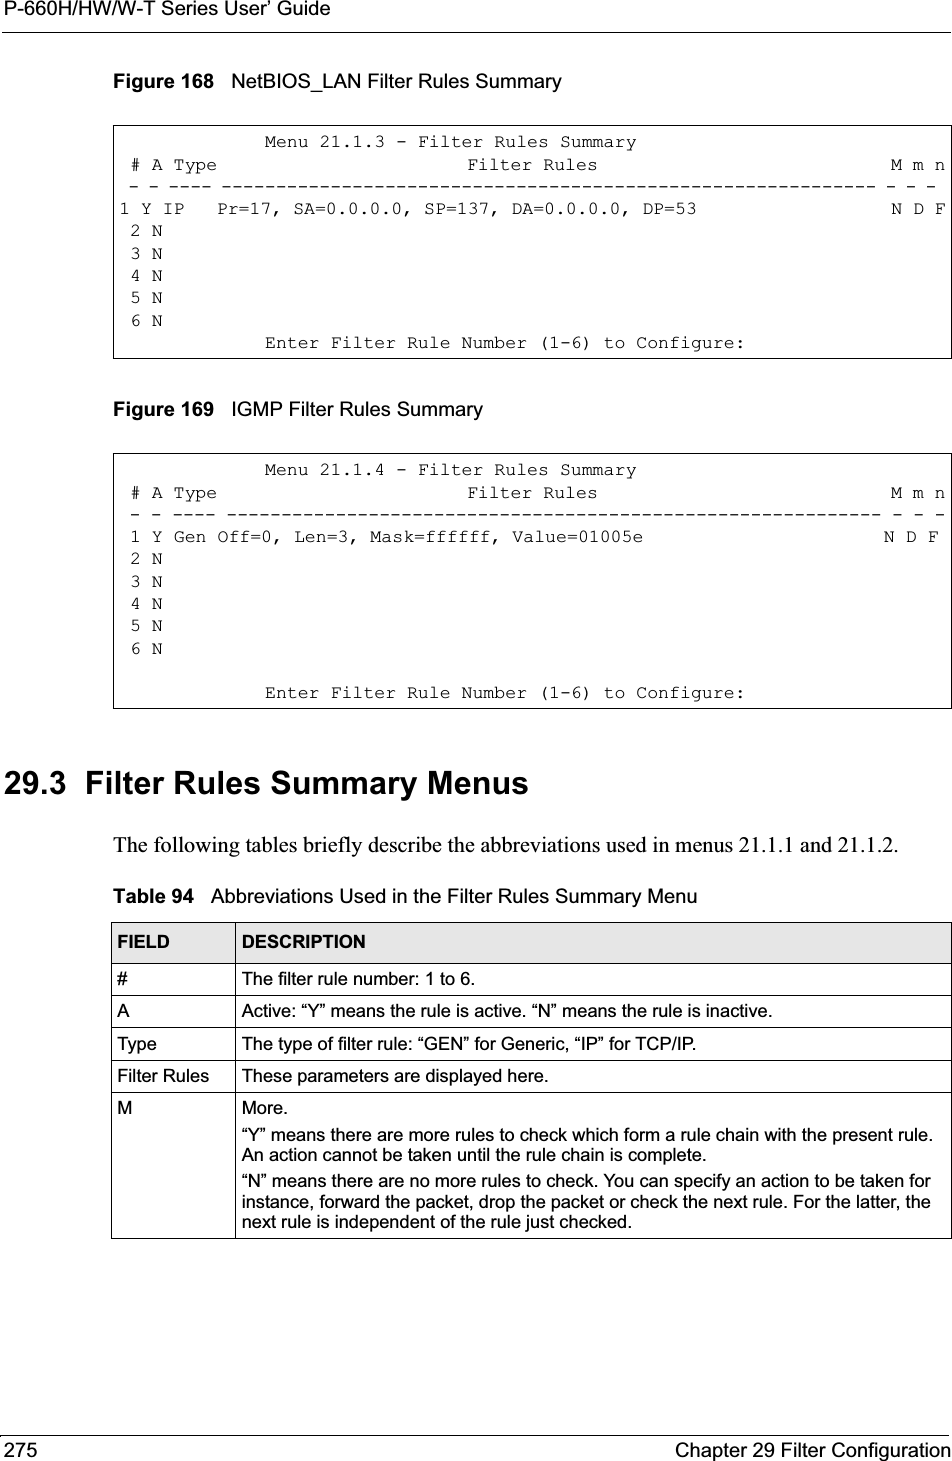 P-660H/HW/W-T Series User’ Guide275 Chapter 29 Filter ConfigurationFigure 168   NetBIOS_LAN Filter Rules Summary Figure 169   IGMP Filter Rules Summary 29.3  Filter Rules Summary MenusThe following tables briefly describe the abbreviations used in menus 21.1.1 and 21.1.2.Menu 21.1.3 - Filter Rules Summary # A Type                       Filter Rules                           M m n - - ---- ------------------------------------------------------------ - - - 1 Y IP   Pr=17, SA=0.0.0.0, SP=137, DA=0.0.0.0, DP=53                  N D F 2 N 3 N 4 N 5 N 6 NEnter Filter Rule Number (1-6) to Configure:Menu 21.1.4 - Filter Rules Summary # A Type                       Filter Rules                           M m n - - ---- ------------------------------------------------------------ - - - 1 Y Gen Off=0, Len=3, Mask=ffffff, Value=01005e                      N D F 2 N 3 N 4 N 5 N 6 NEnter Filter Rule Number (1-6) to Configure:Table 94   Abbreviations Used in the Filter Rules Summary MenuFIELD DESCRIPTION#The filter rule number: 1 to 6.AActive: “Y” means the rule is active. “N” means the rule is inactive.Type The type of filter rule: “GEN” for Generic, “IP” for TCP/IP. Filter Rules These parameters are displayed here.MMore.“Y” means there are more rules to check which form a rule chain with the present rule. An action cannot be taken until the rule chain is complete.“N” means there are no more rules to check. You can specify an action to be taken for instance, forward the packet, drop the packet or check the next rule. For the latter, the next rule is independent of the rule just checked.